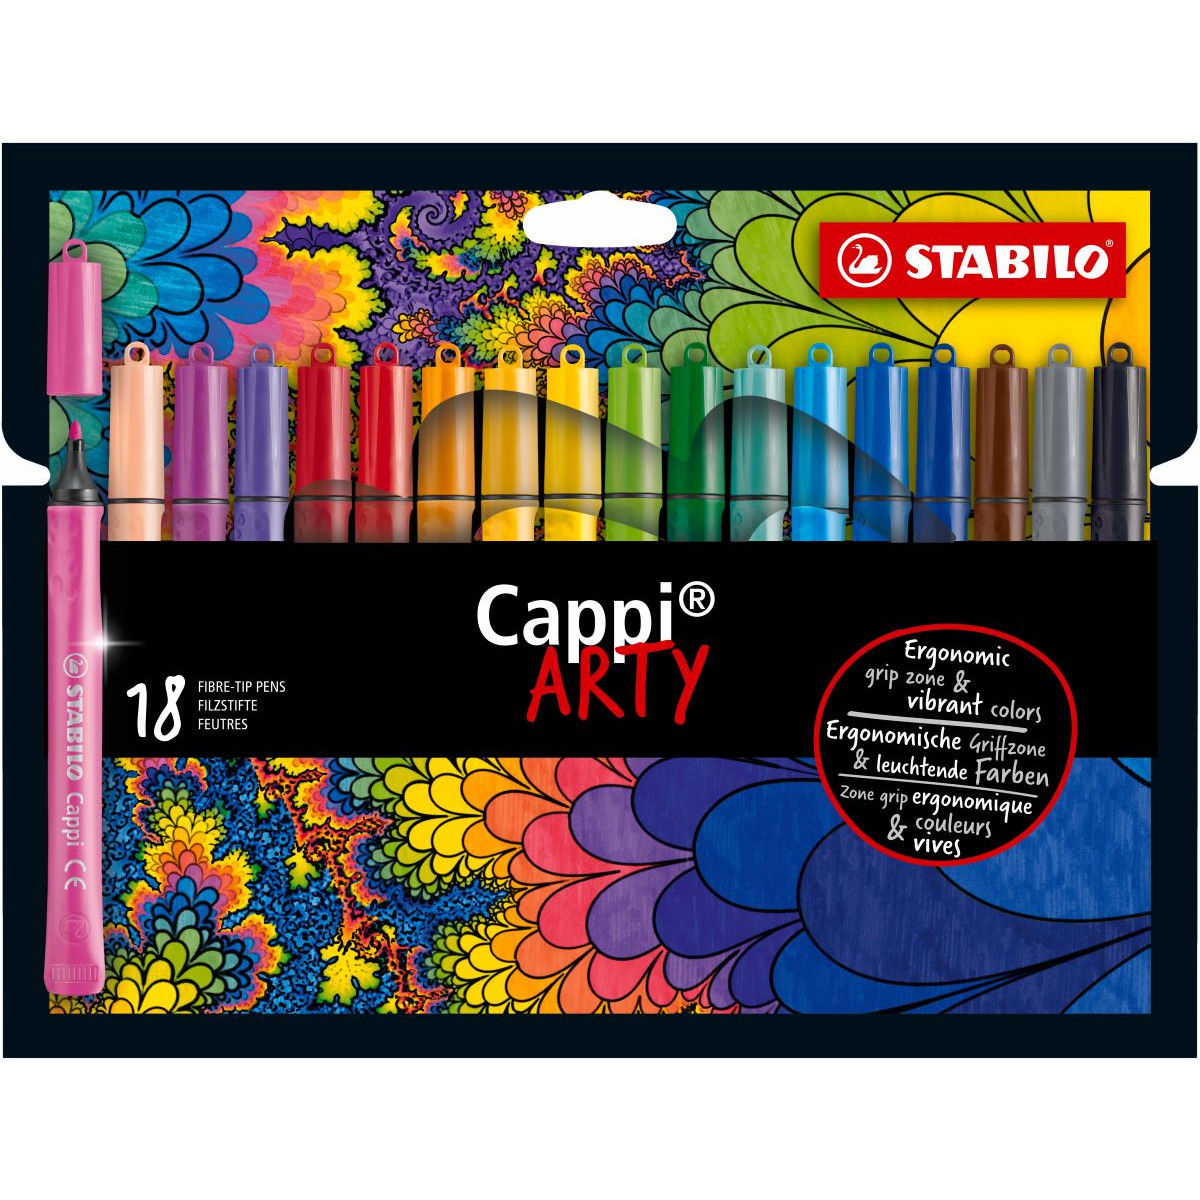 Fineliner - STABILO point 88 - Wallet of 30 - Assorted colors incl